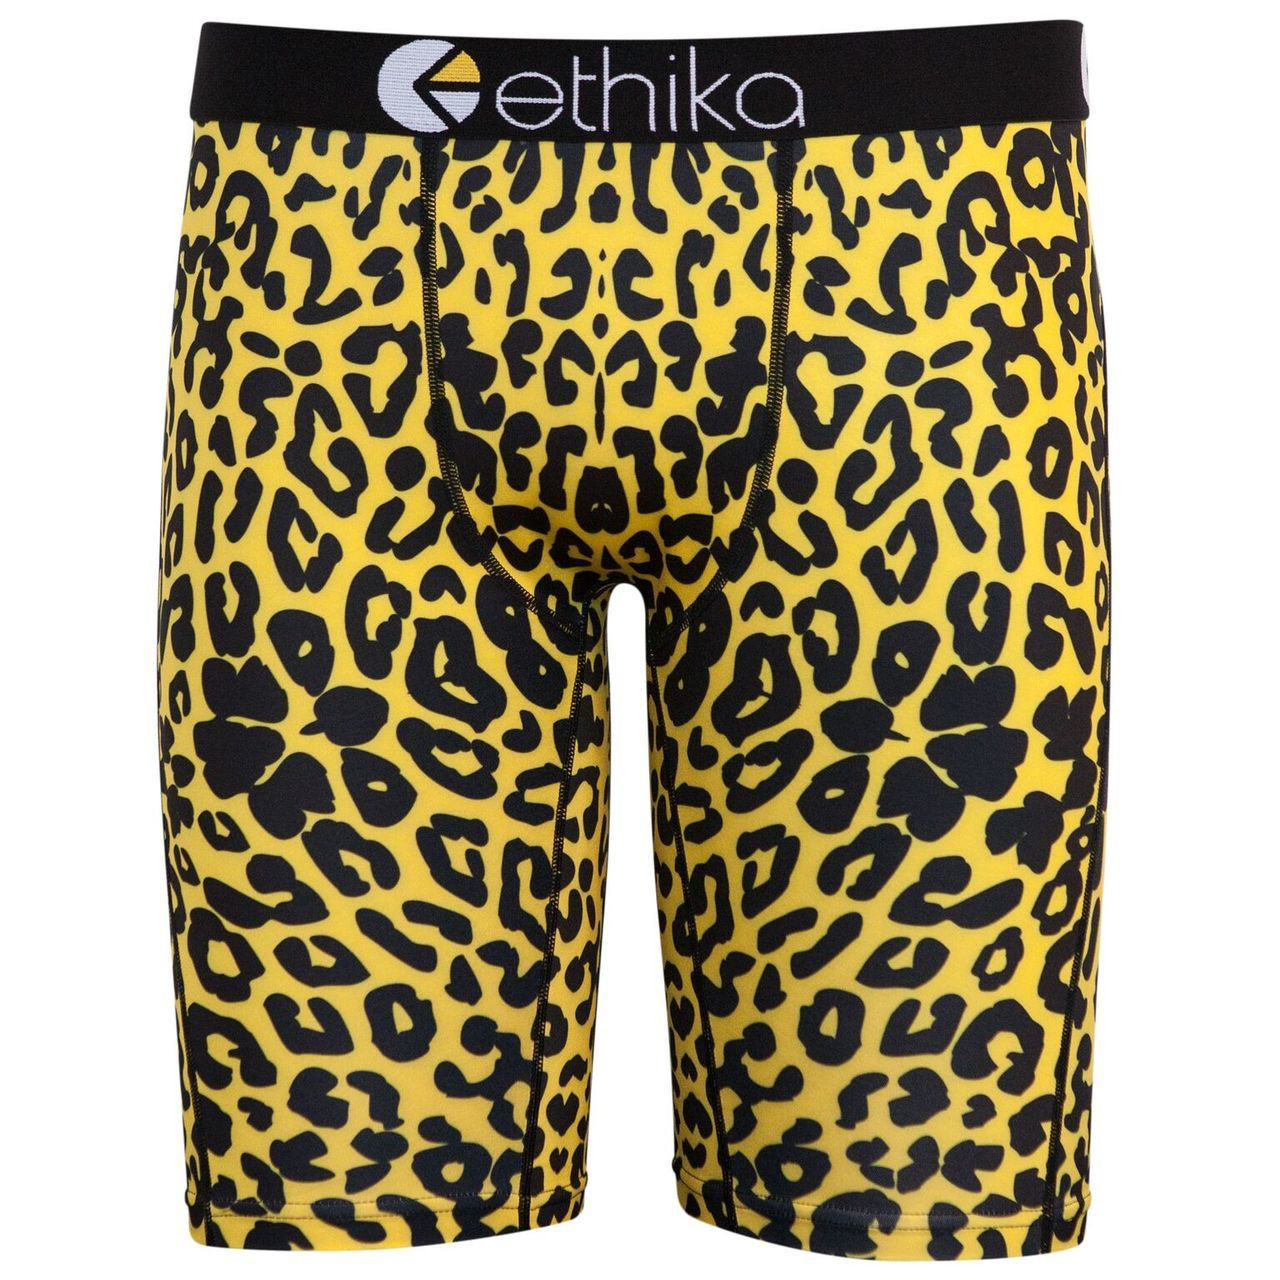 Ethika Yellow Cat Adult Mens Boxer Brief UMS764 - Fearless Apparel